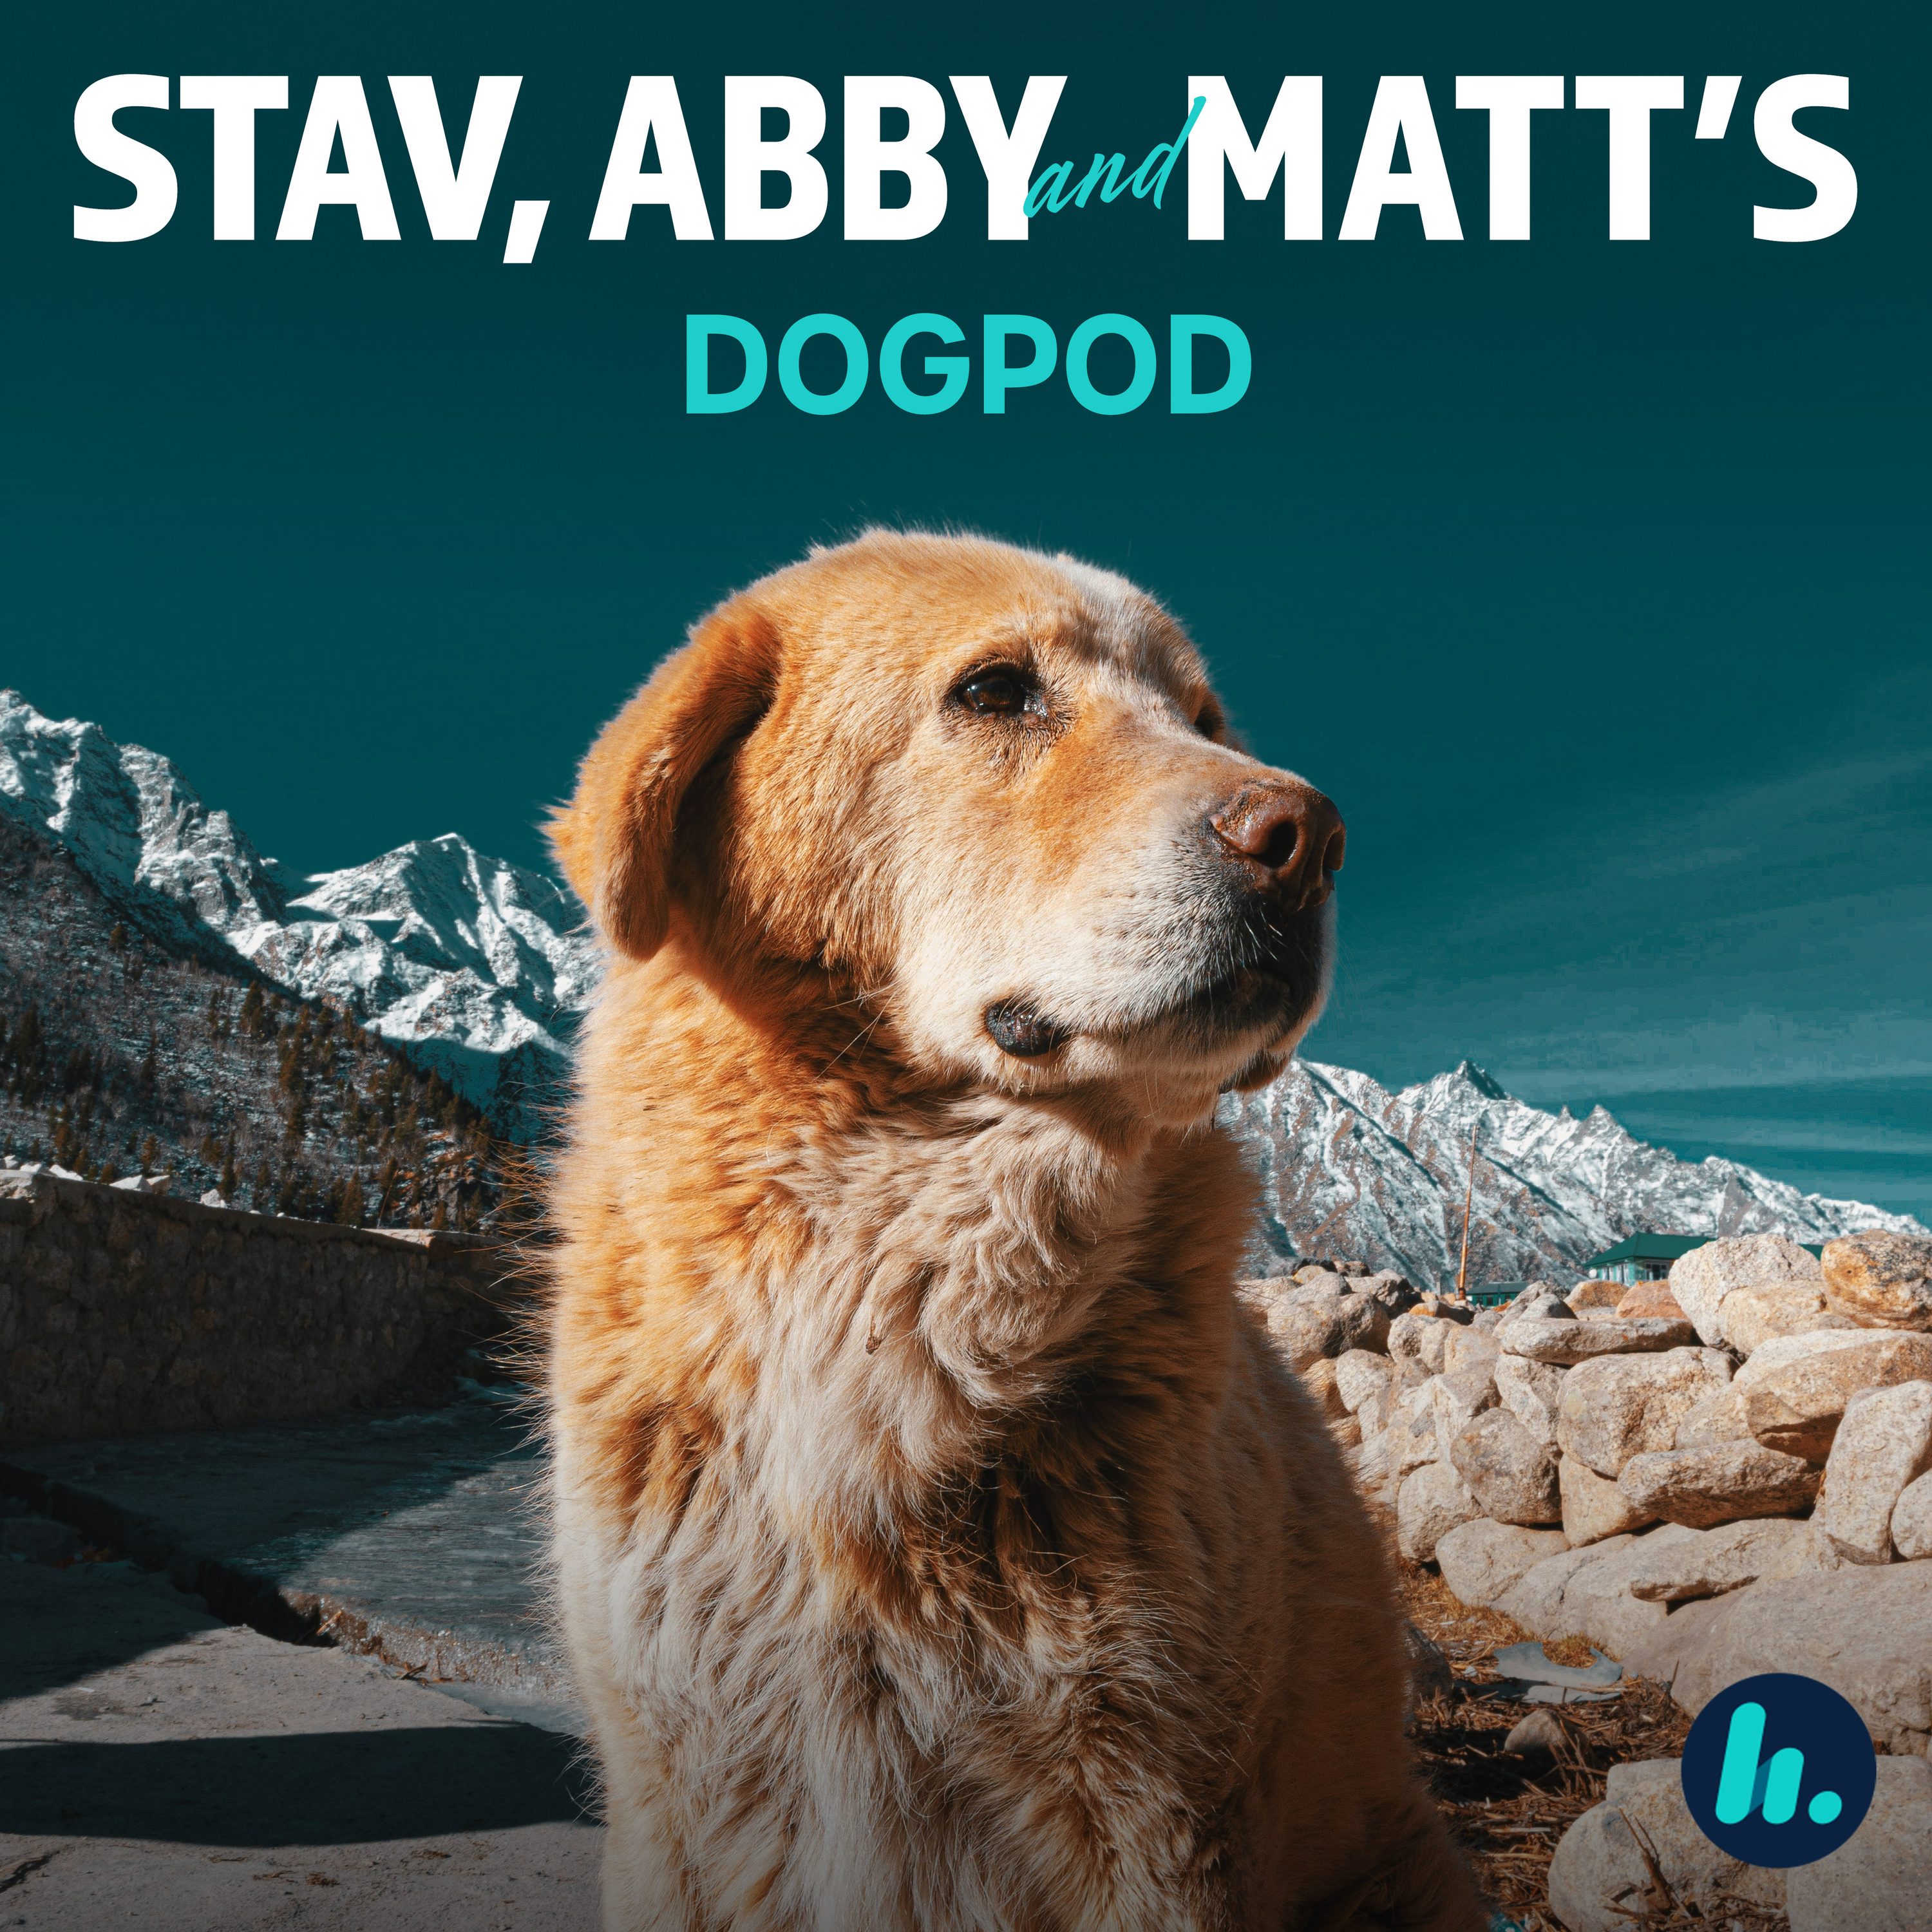 DogPod Episode 1: Dr Chris Brown chats to your dog!